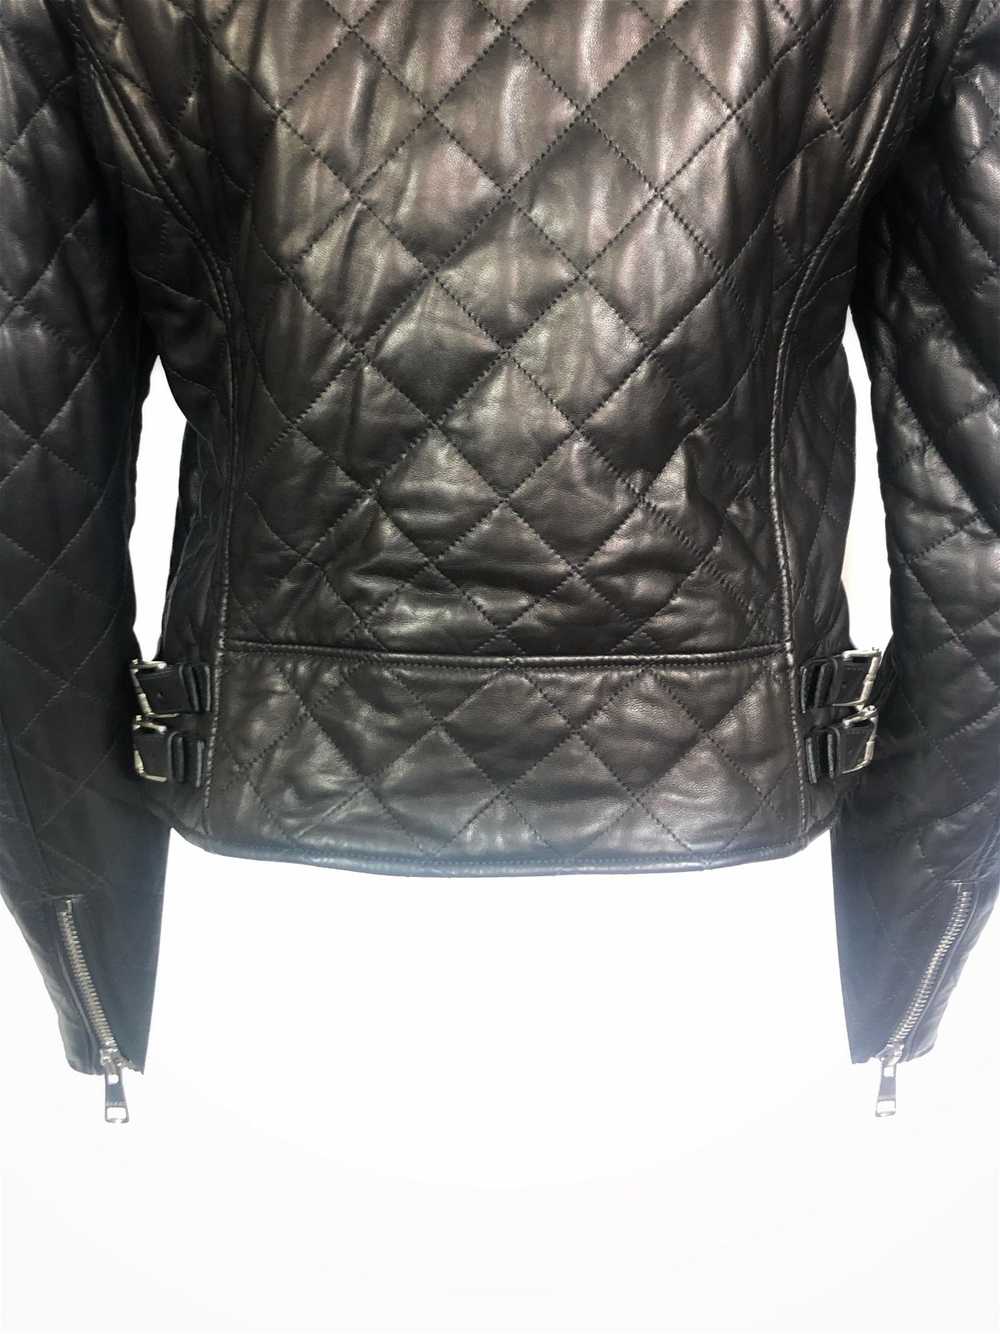 GUCCI Brown Leather Moto Jacket w/ Pearls Size 44 - image 9